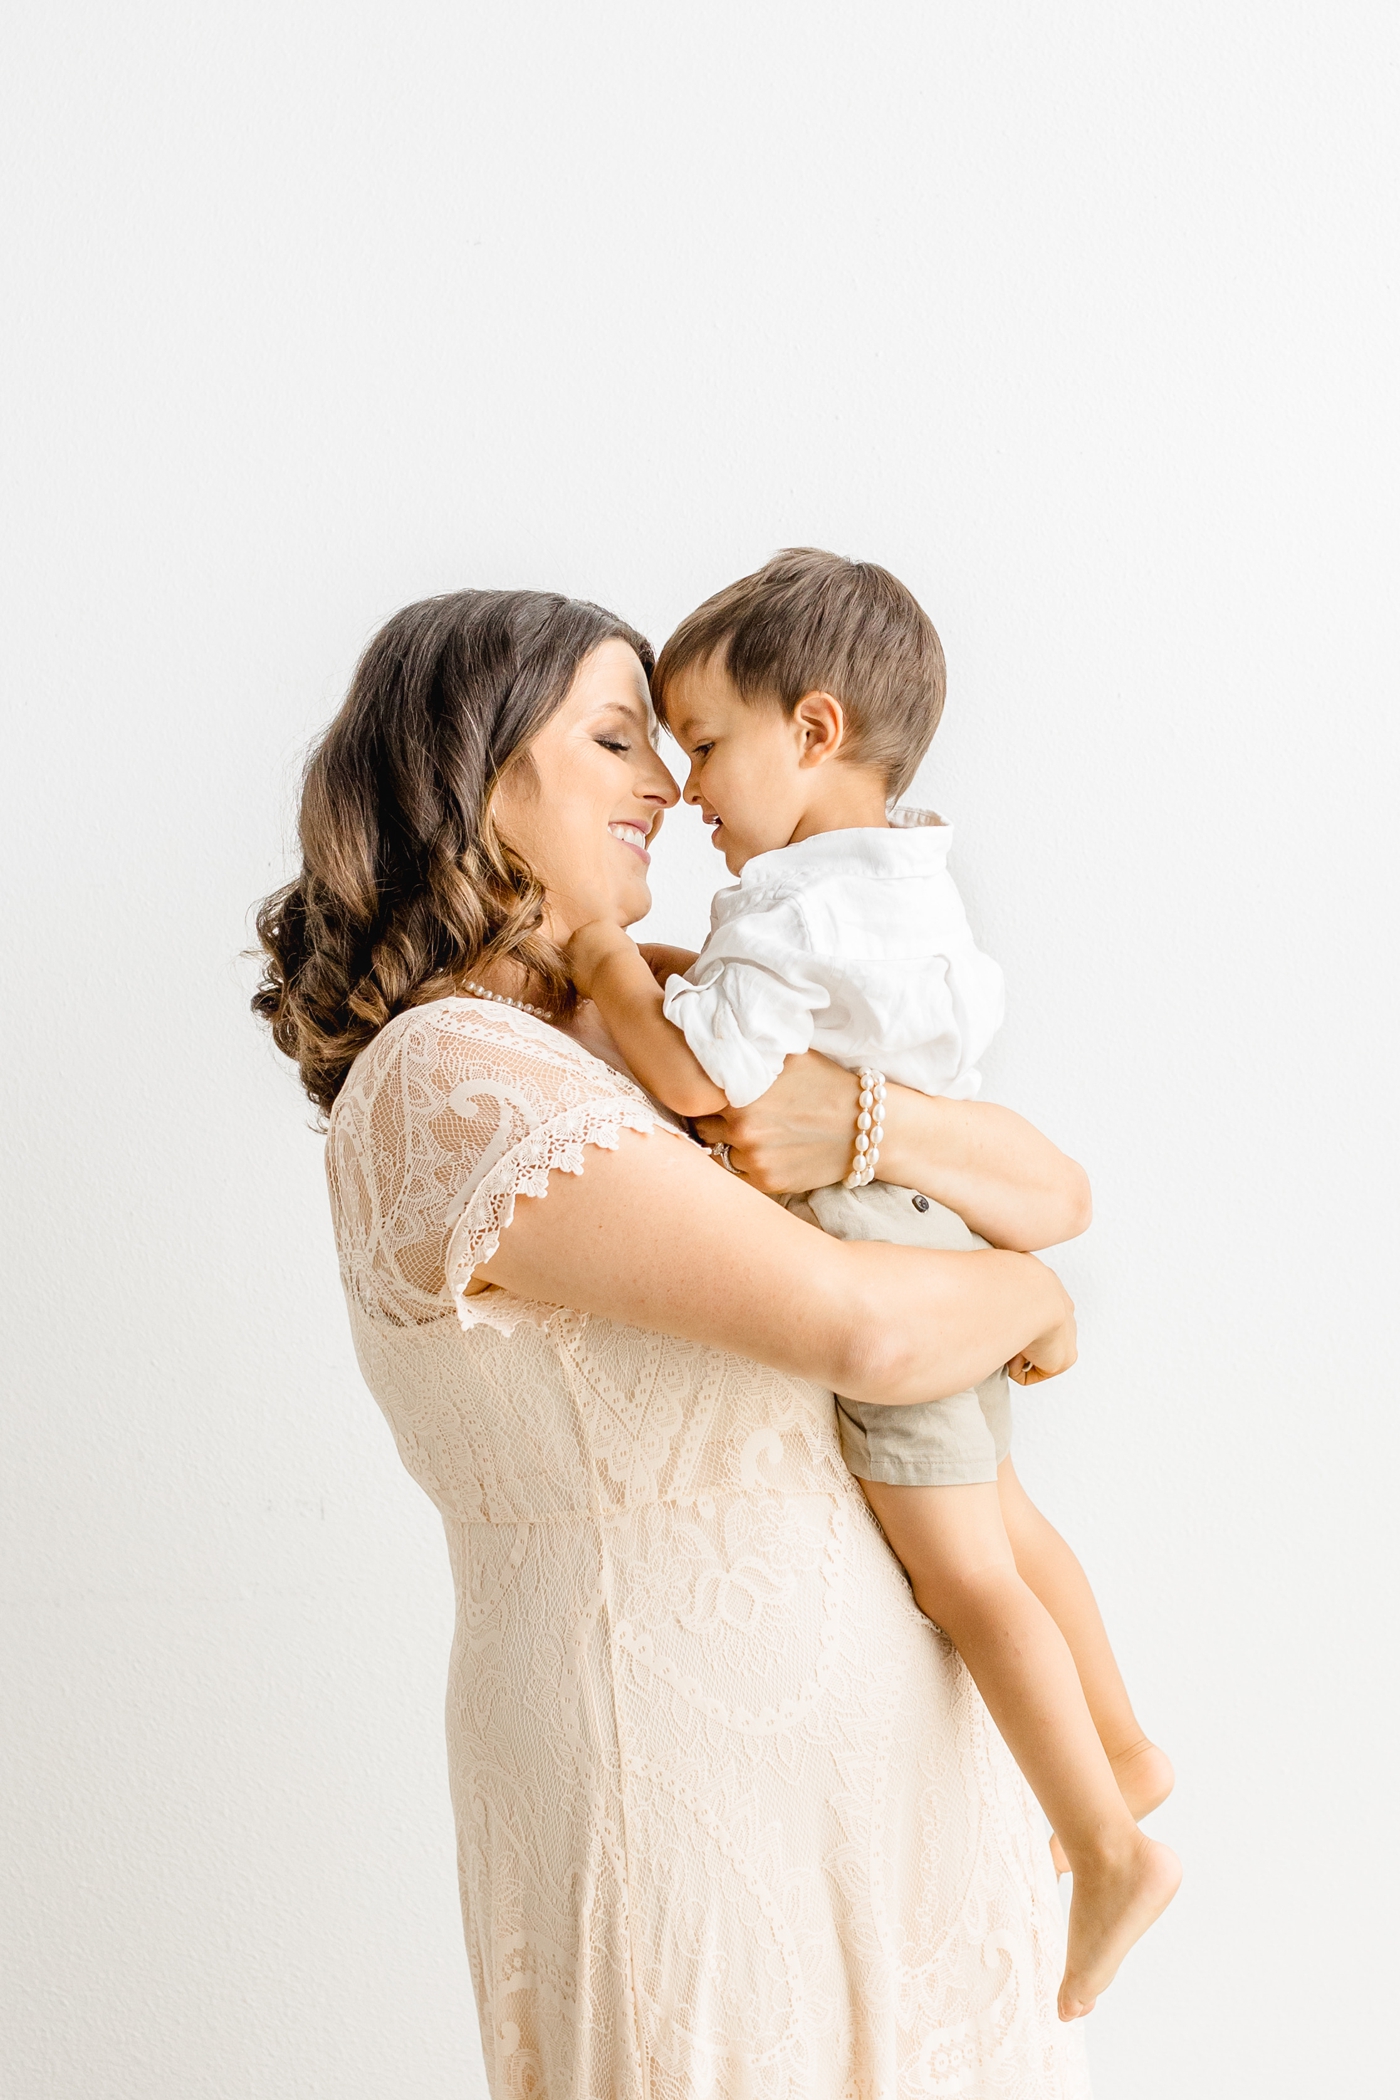 Mom hugging son during studio portrait session with full service photographer in Austin, Sana Ahmed Photography.